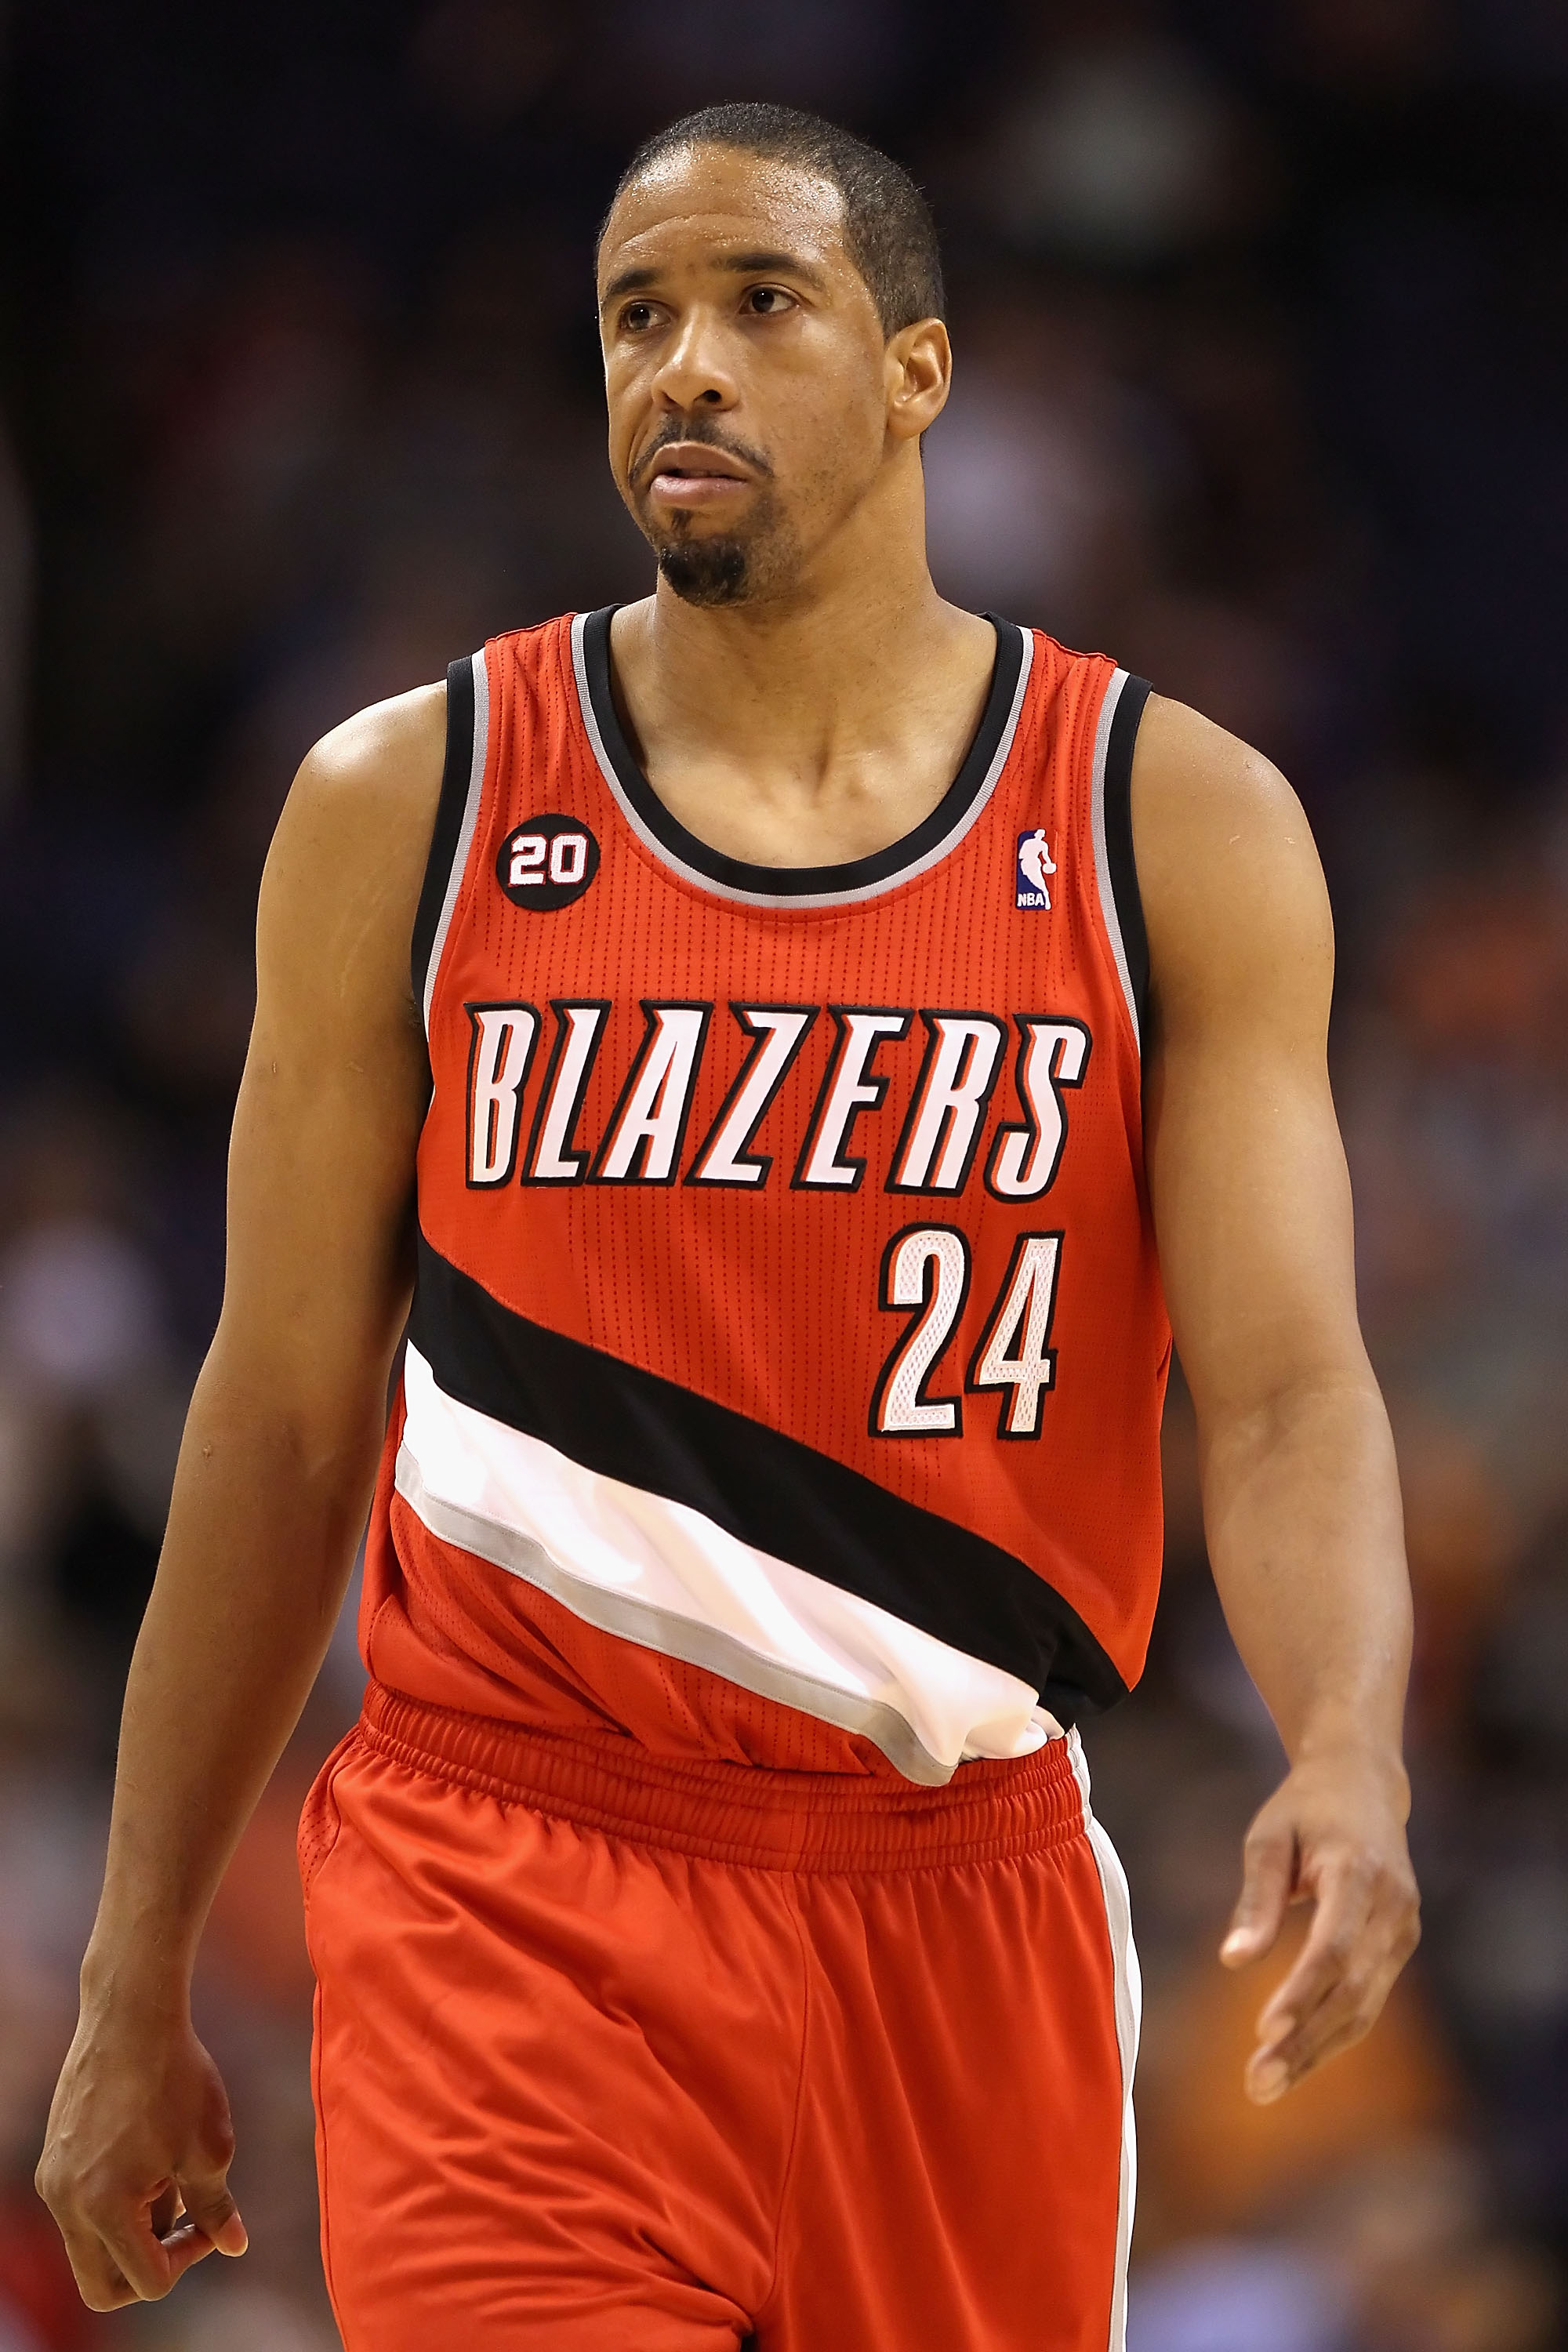 PHOENIX - DECEMBER 10:  Andre Miller #24 of the Portland Trail Blazers during the NBA game against the Phoenix Suns at US Airways Center on December 10, 2010 in Phoenix, Arizona. The Trail Blazers defeated the Suns 101-94.  NOTE TO USER: User expressly ac